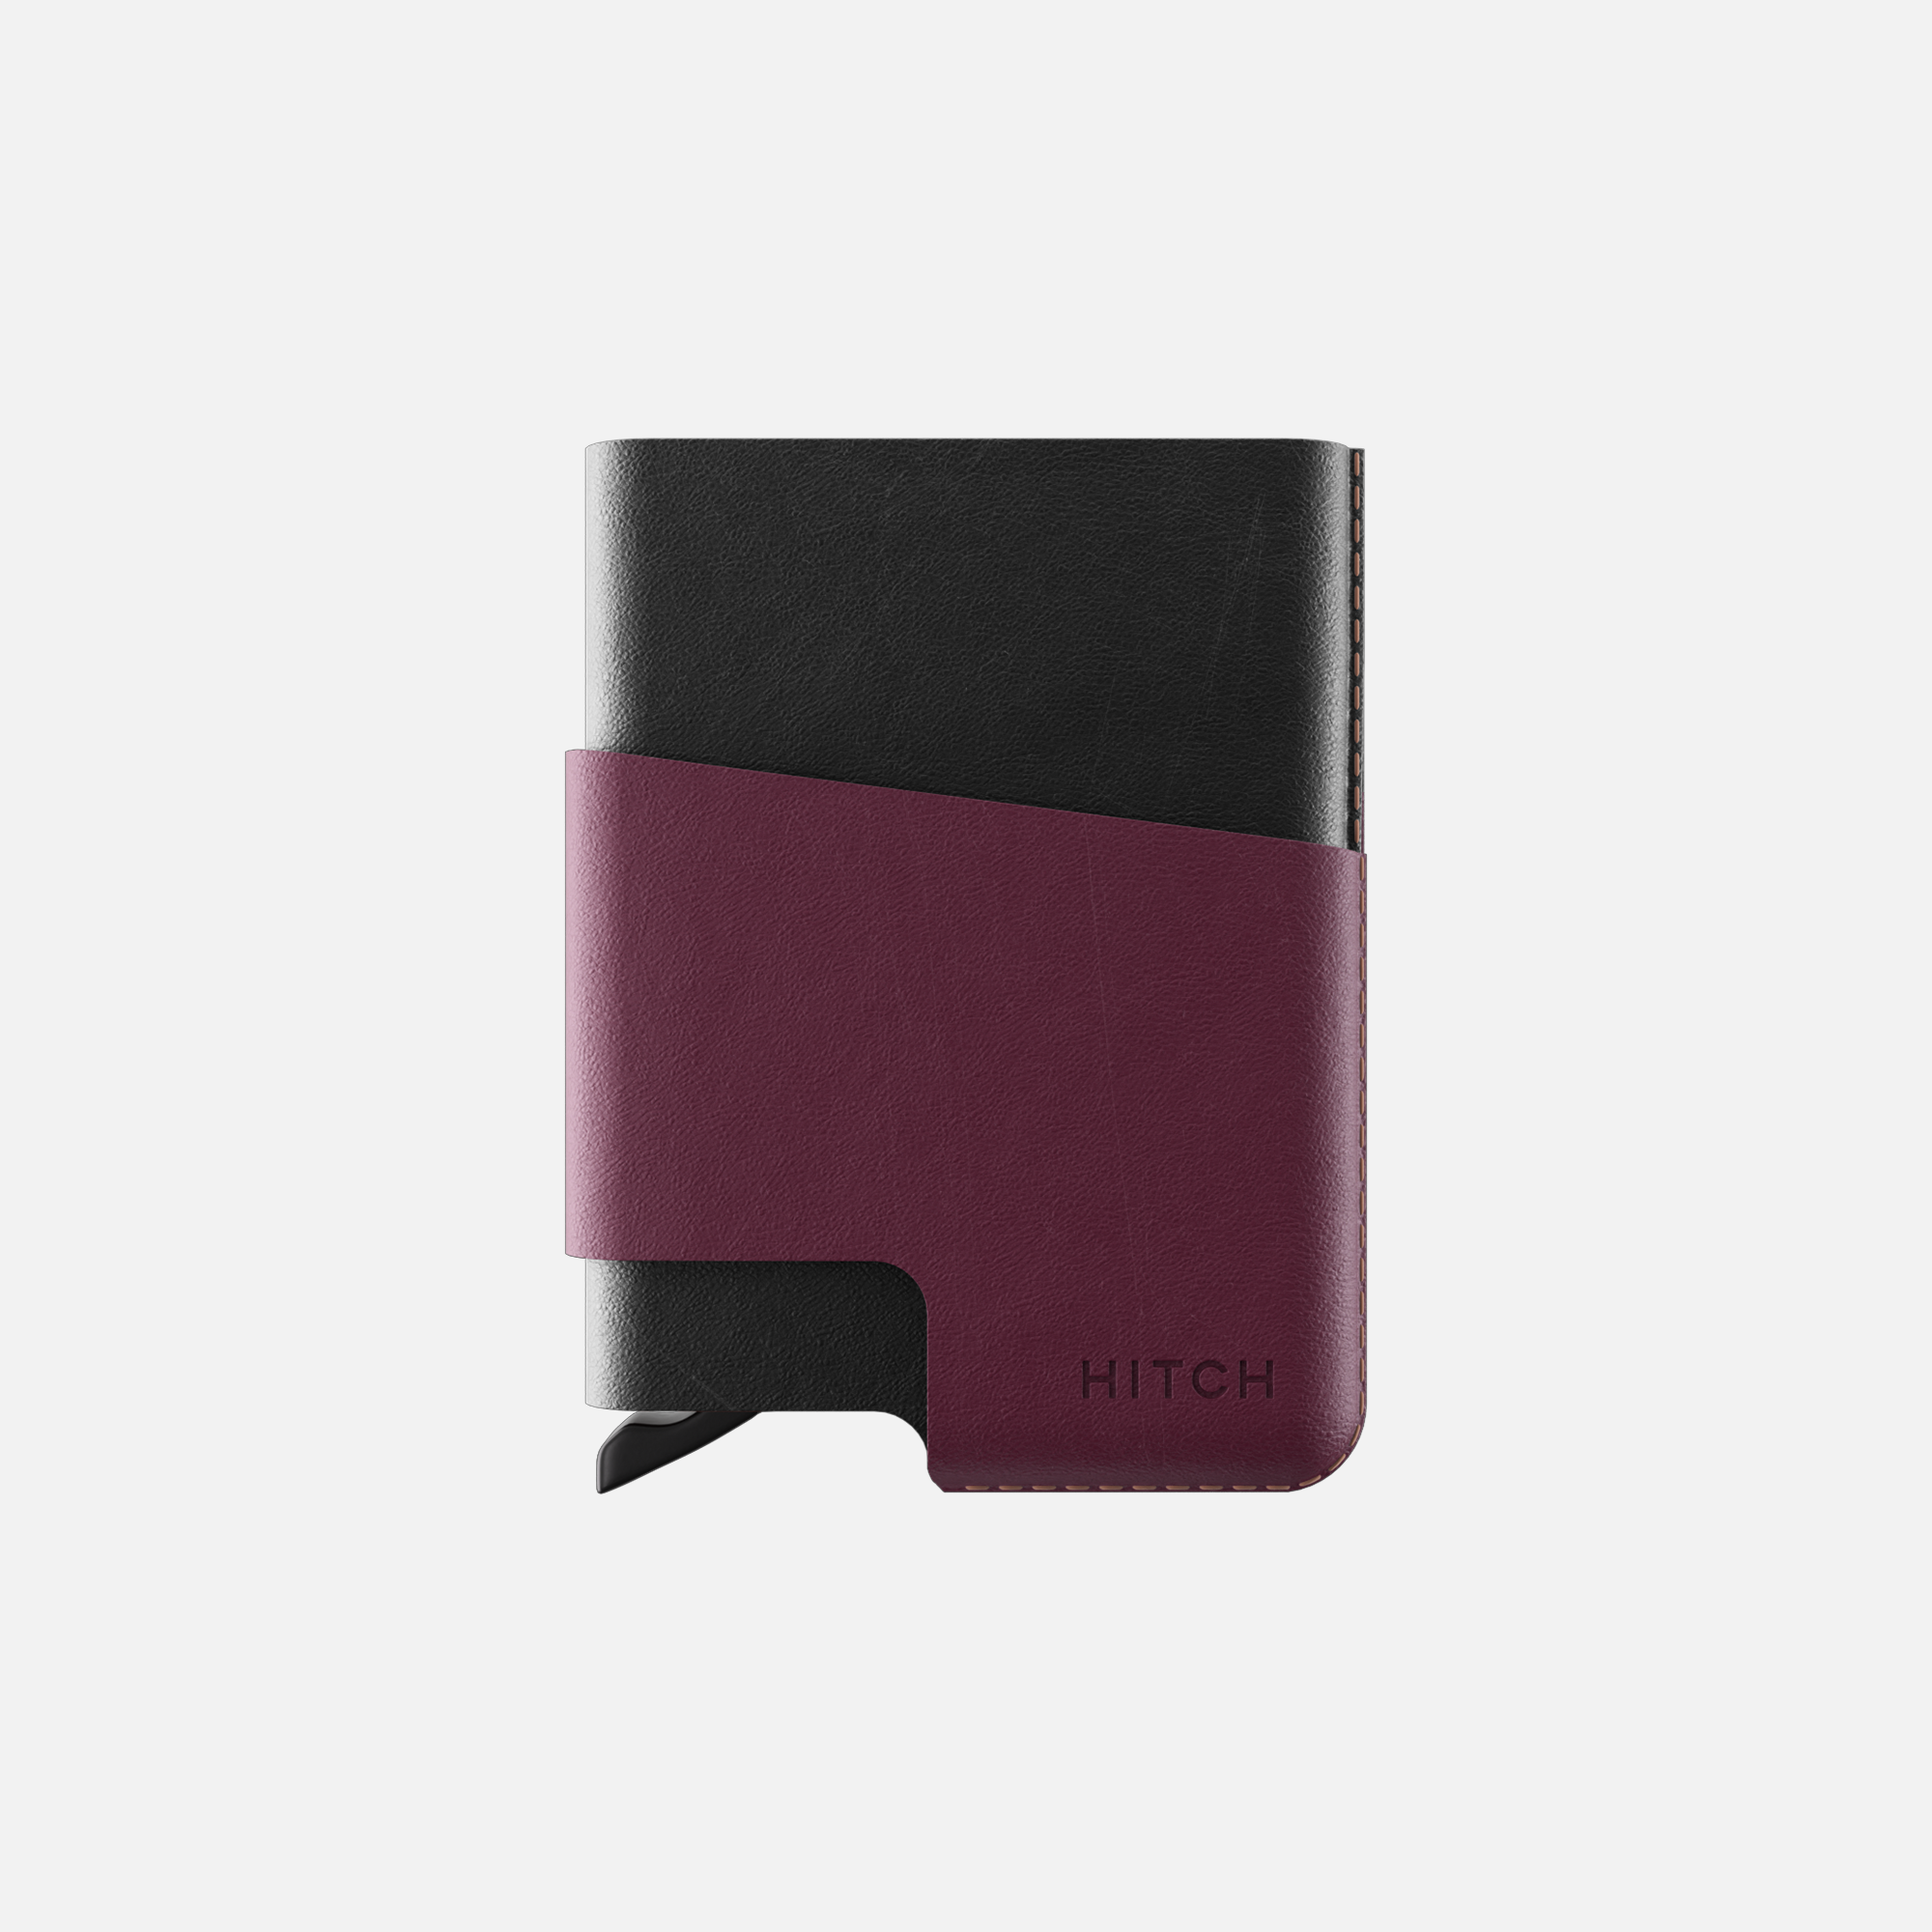 Black and purple leather wallet with visible stitching and embossed 'HITCH' logo.